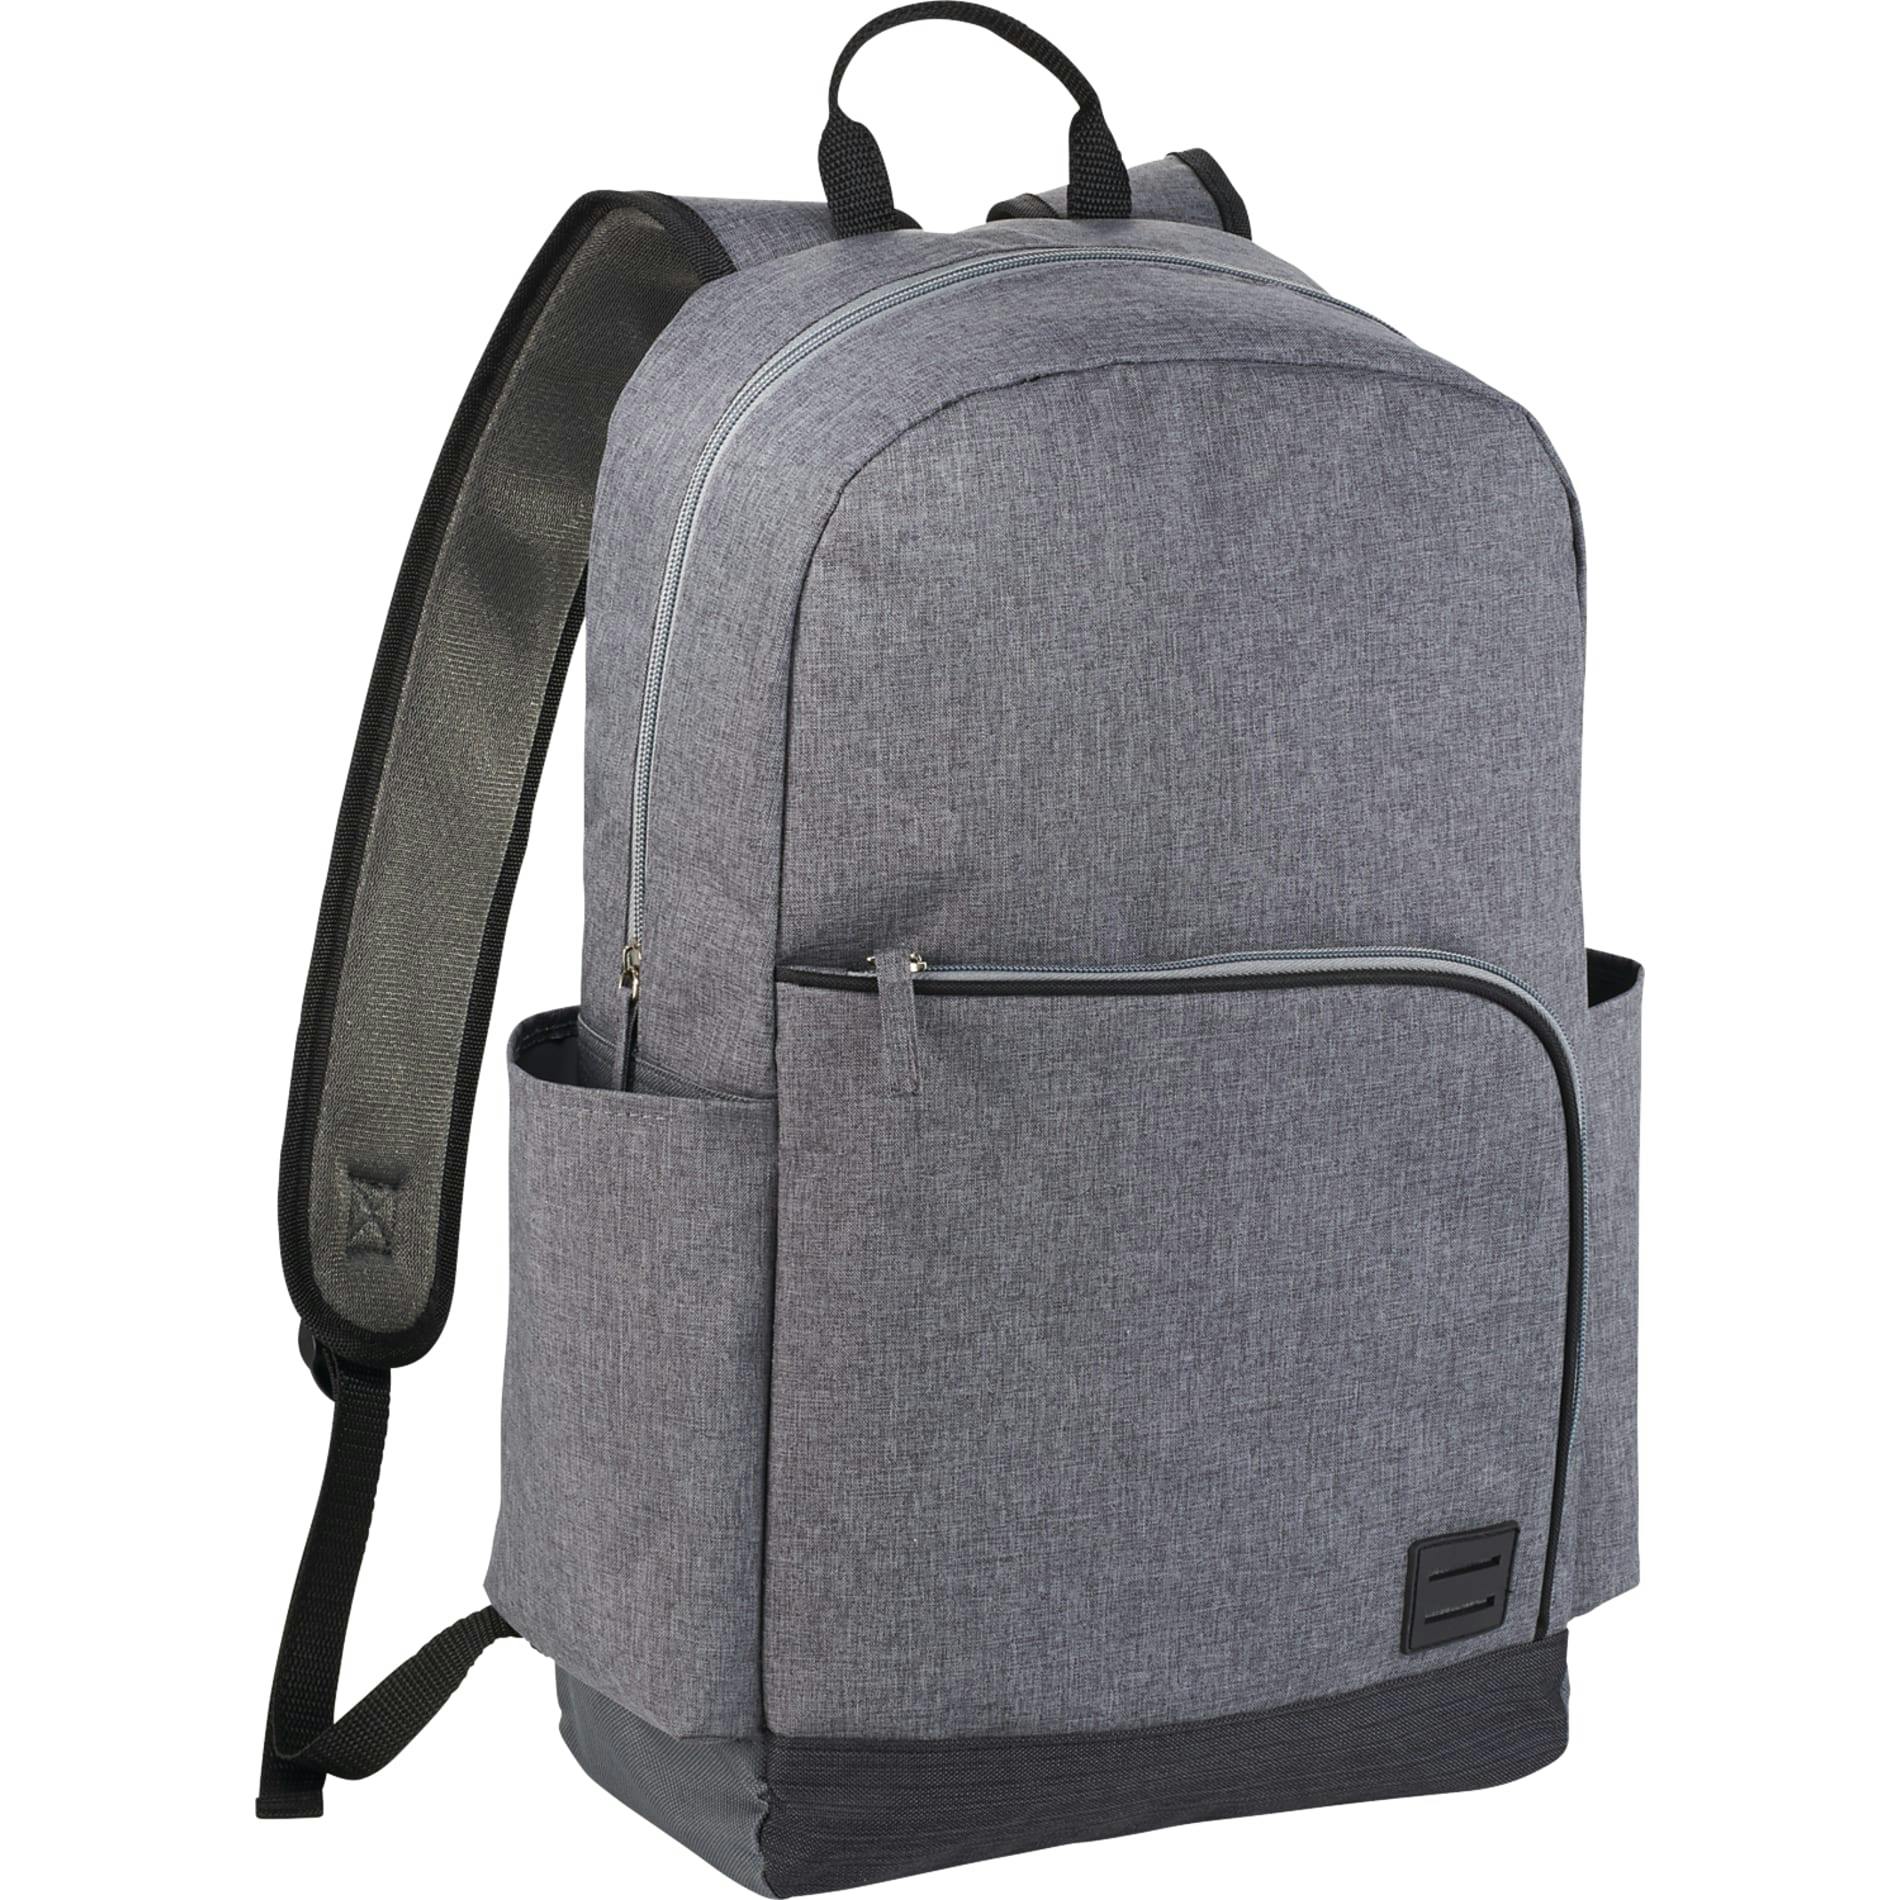 Grayson 15" Computer Backpack - additional Image 4